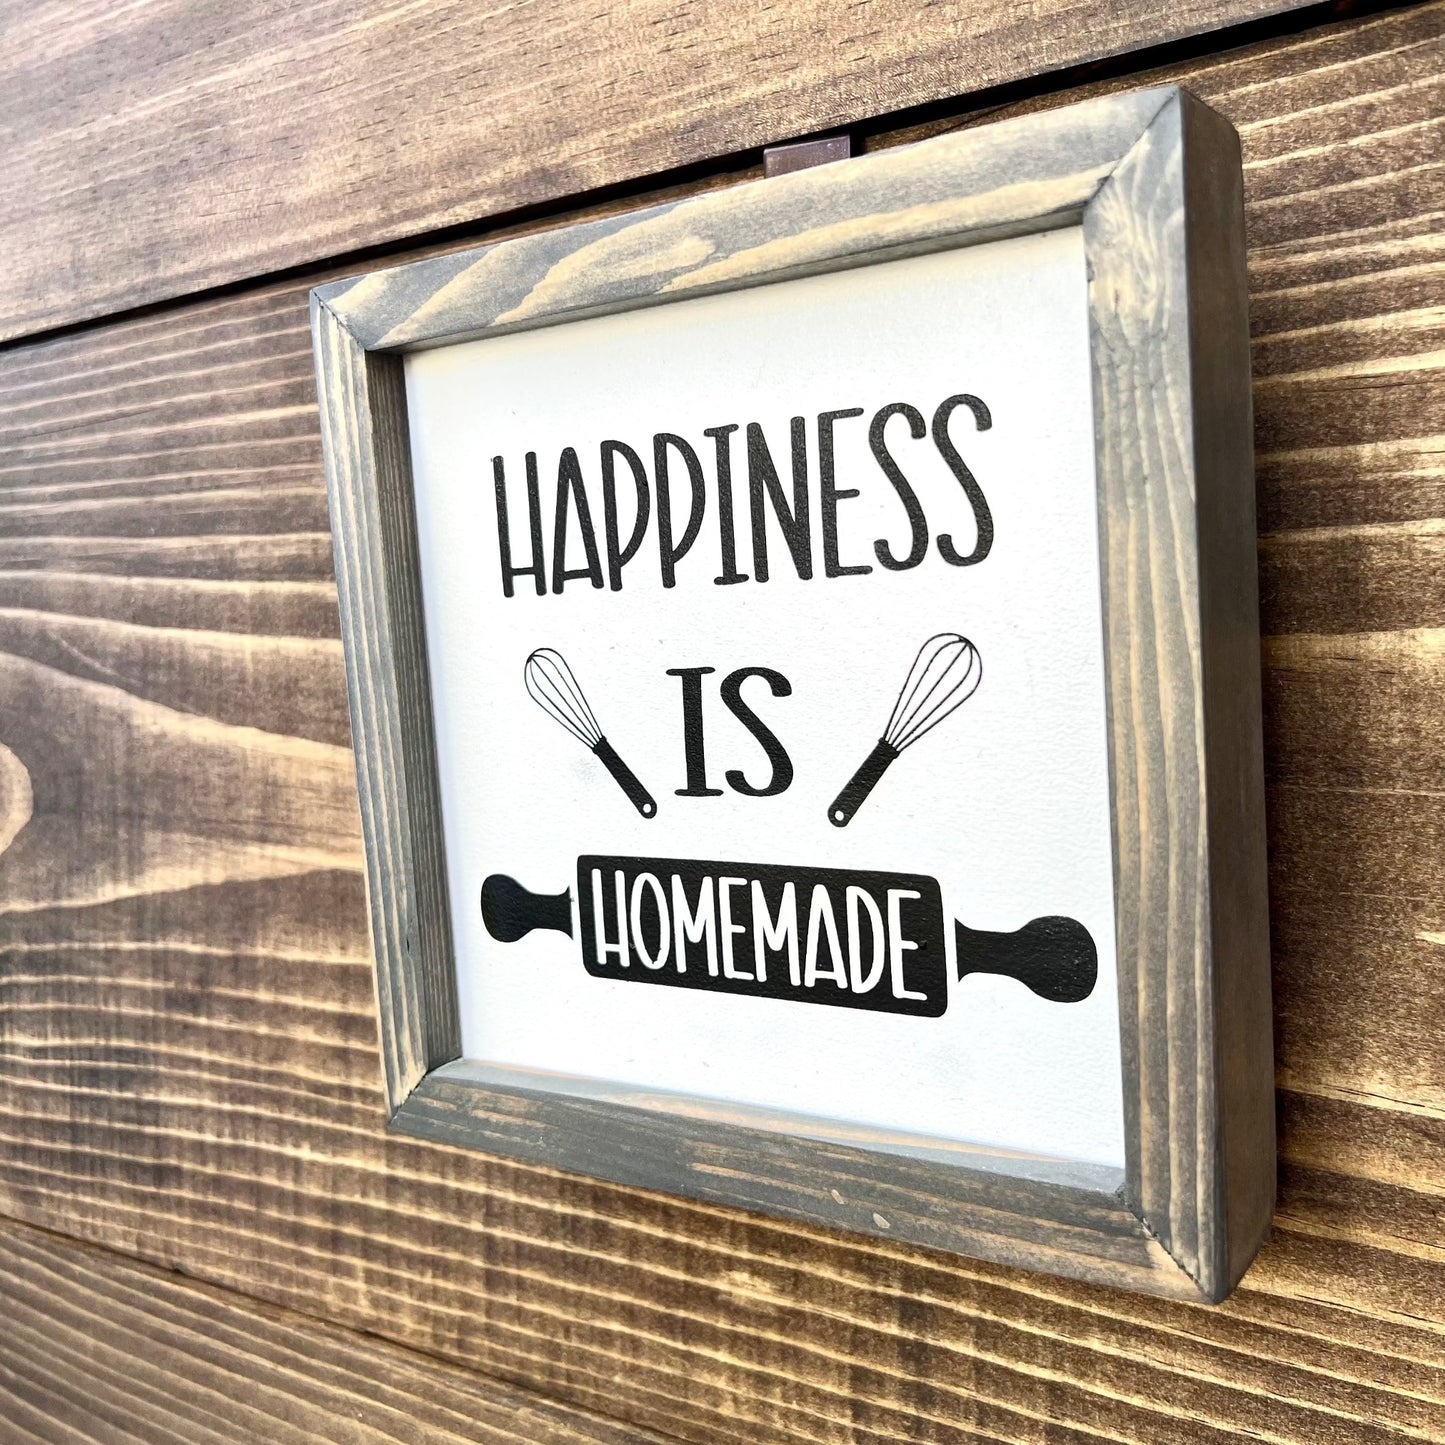 If I have to stir it, It is homemade, double side wood sign, sitter kitchen sign